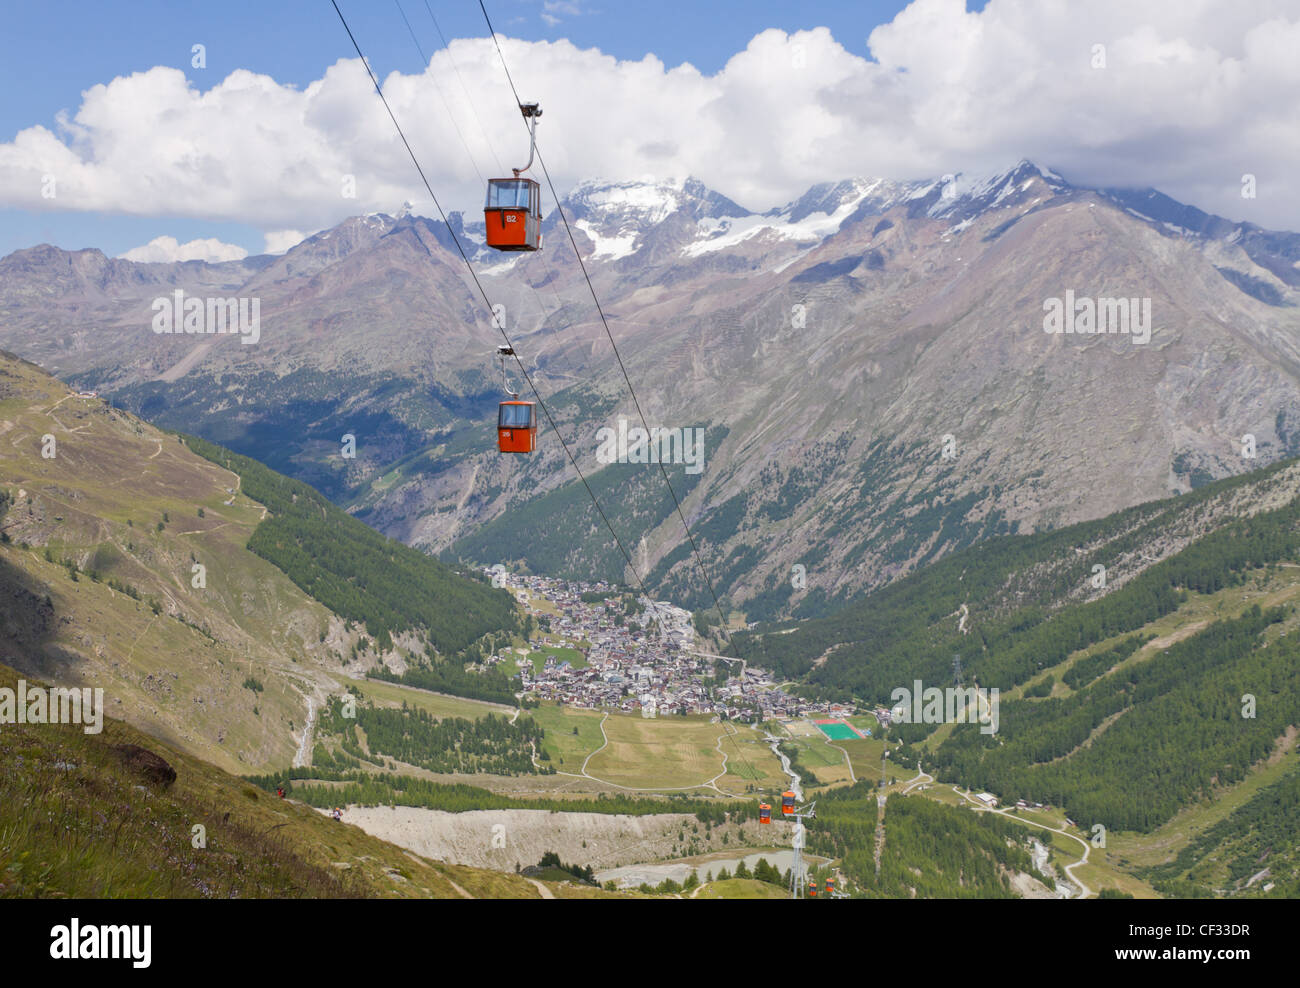 Alpine town of Saas Fee in Saas valley surrounded by high mountains, connected by cable car, Valais, Switzerland Stock Photo